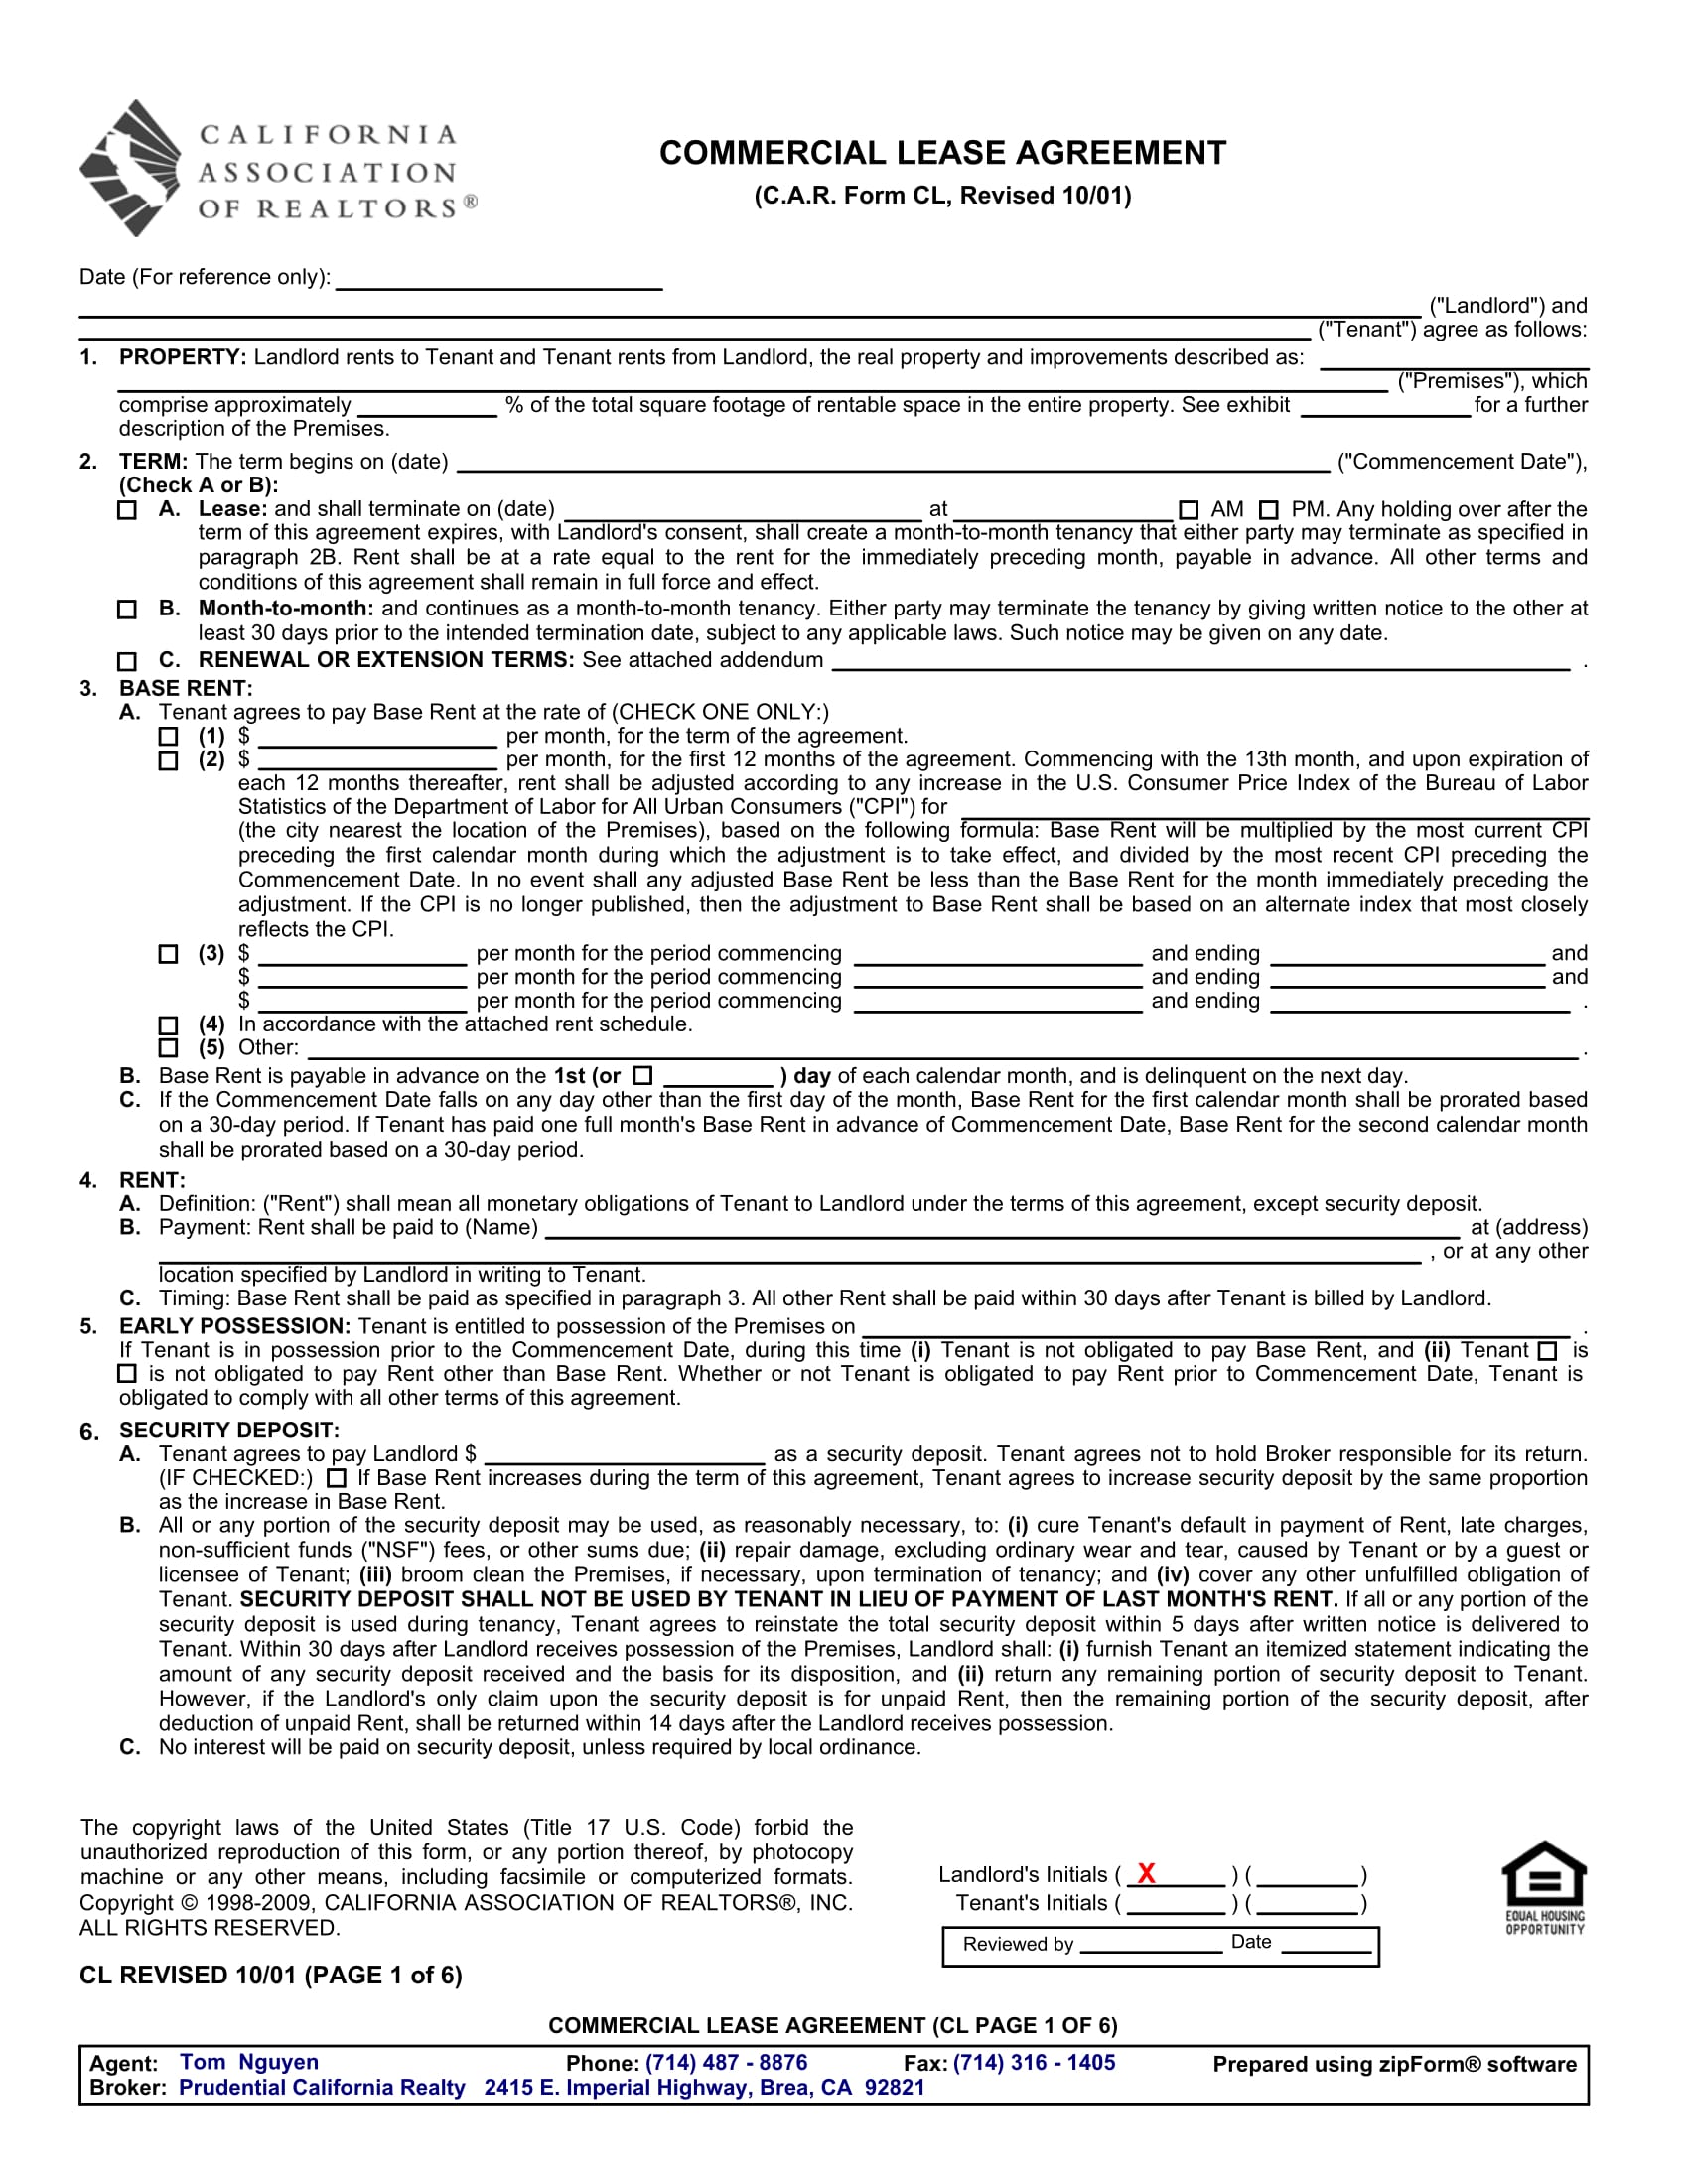 commercial lease agreement form 1